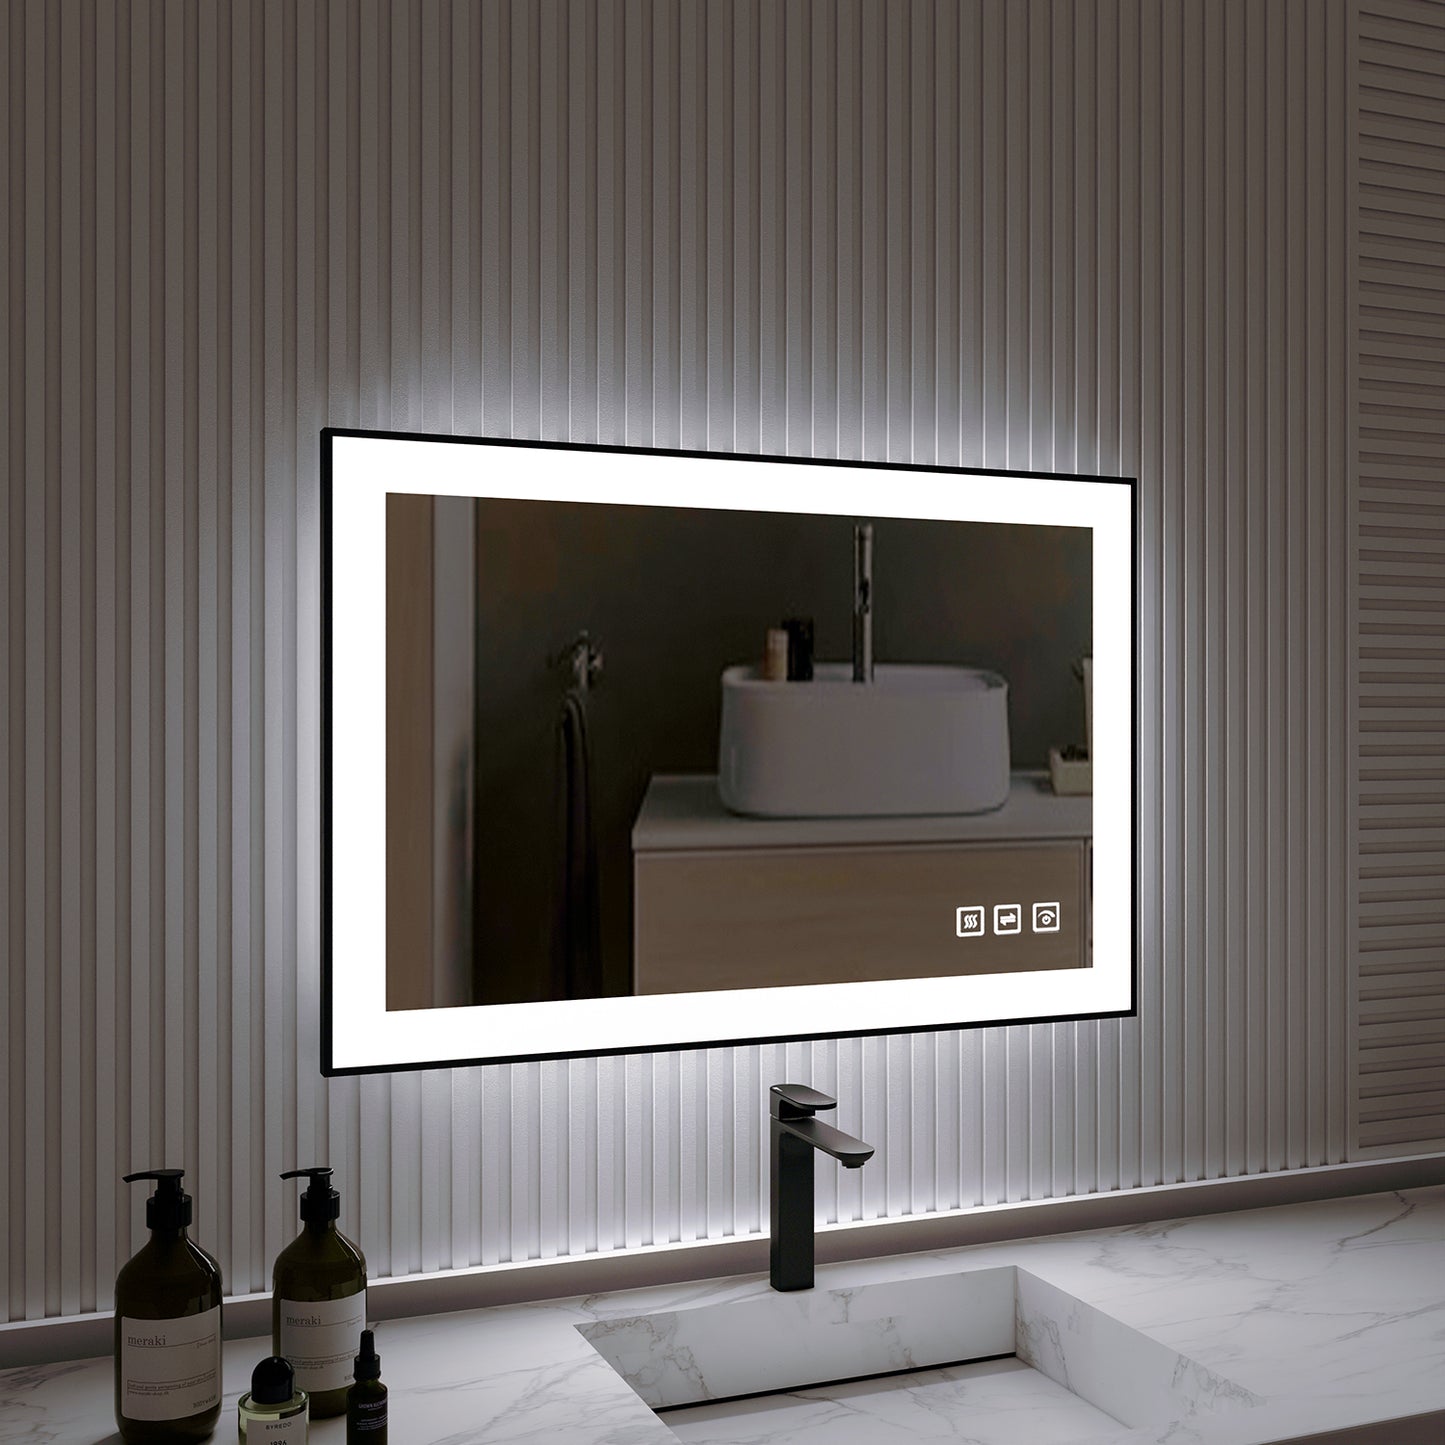 Waterpar® 36 in. W x 28 in. H Rectangular Framed Anti-Fog LED Wall Bathroom Vanity Mirror in Black with Backlit and Front Light